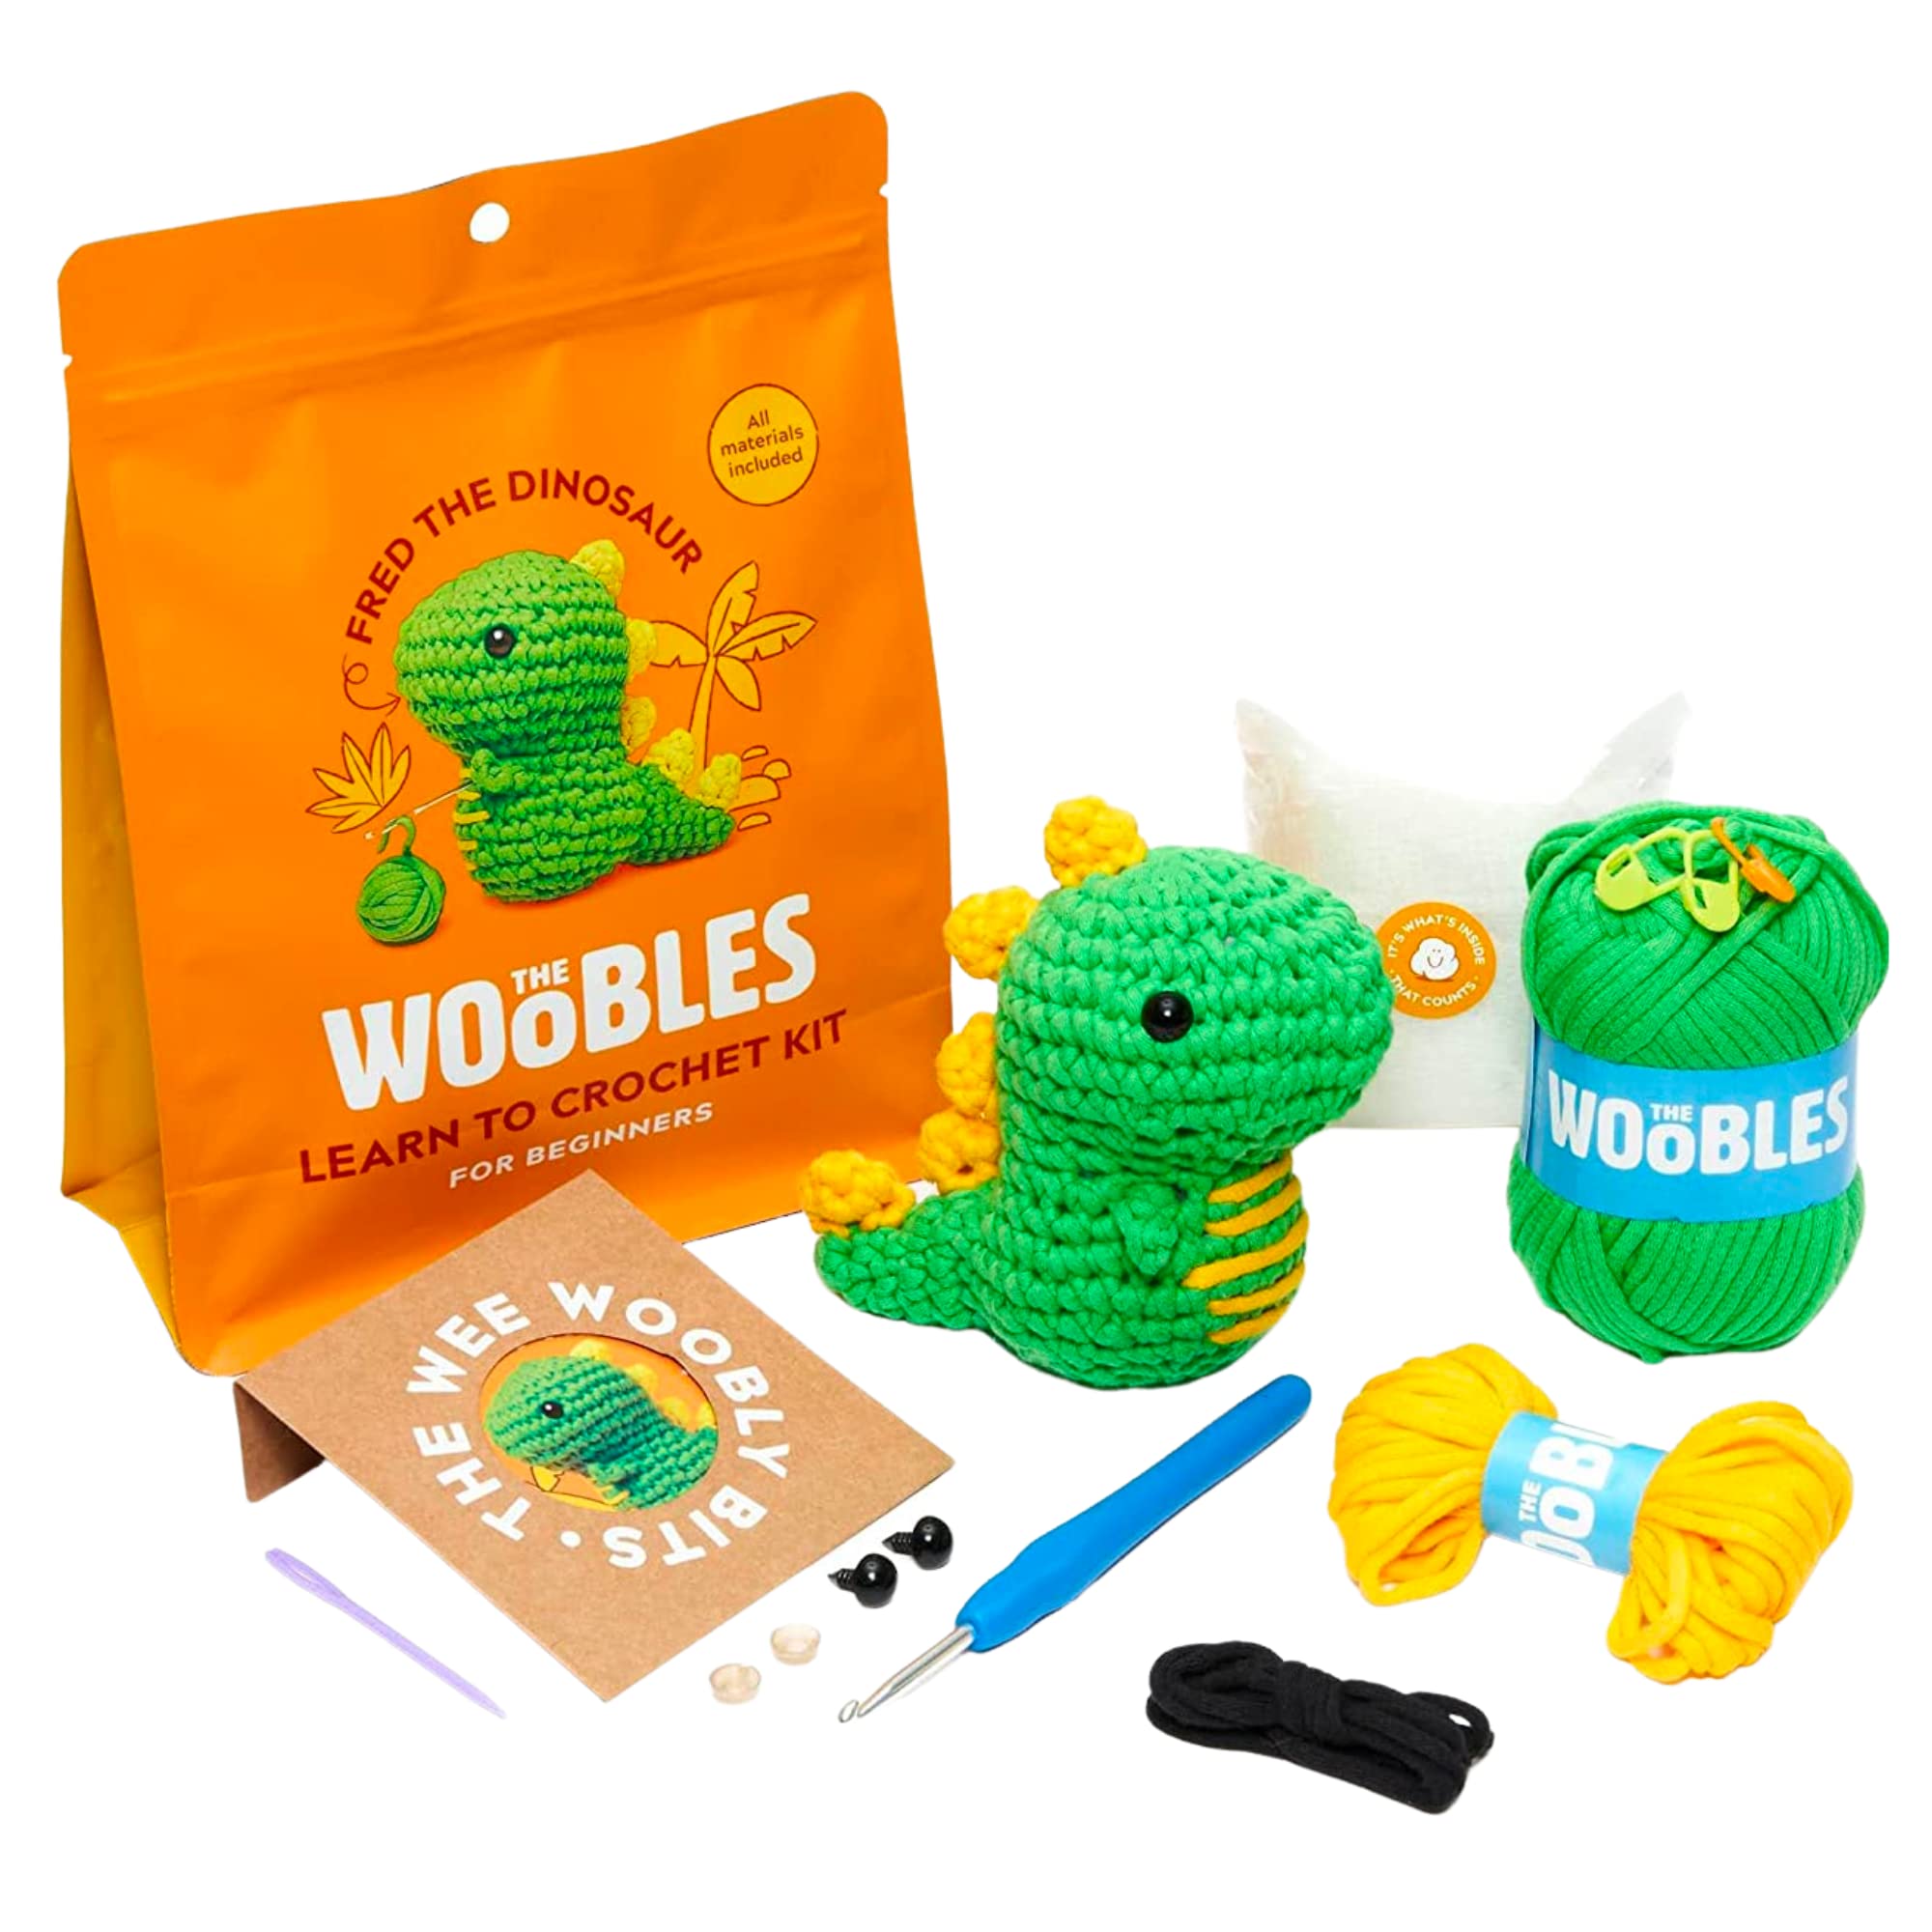 Woobles Reviews